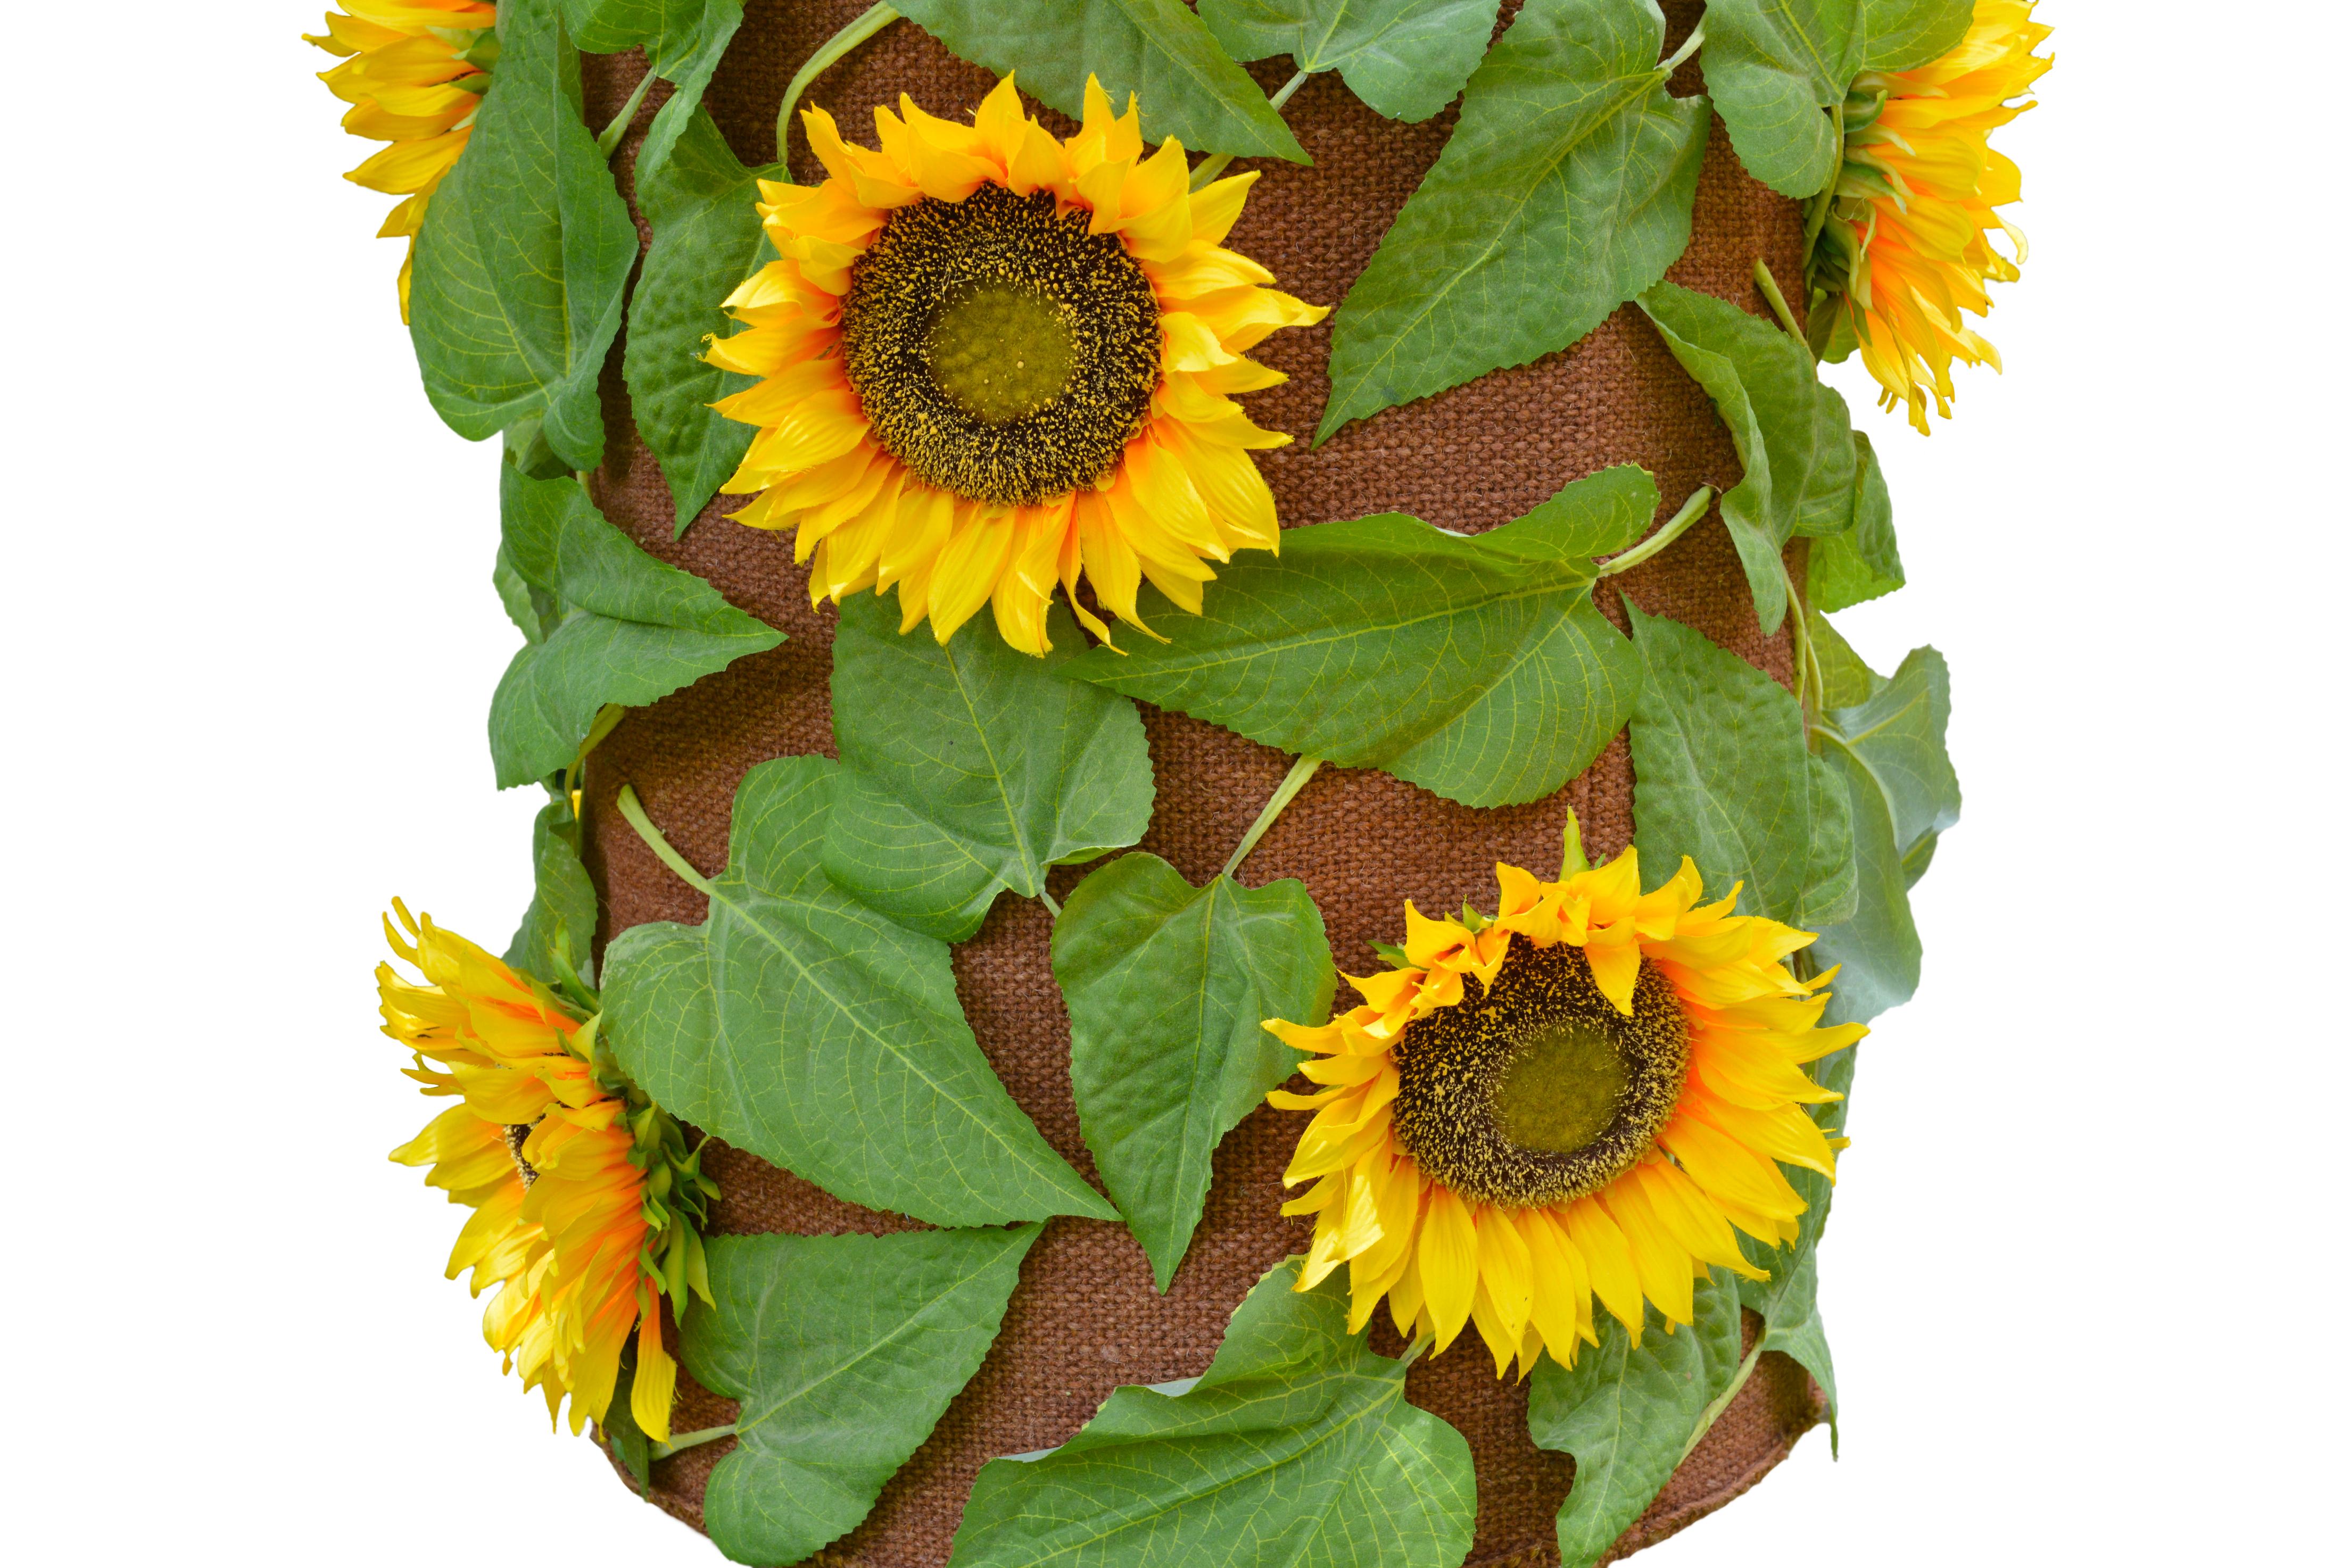 Funky ceramic lamp base with sunflowers, daisies and foliage painted in yellows, oranges, greens and white blues. On the base is a bespoke made brown linen shade with faux sunflower heads and leaves stitched on.